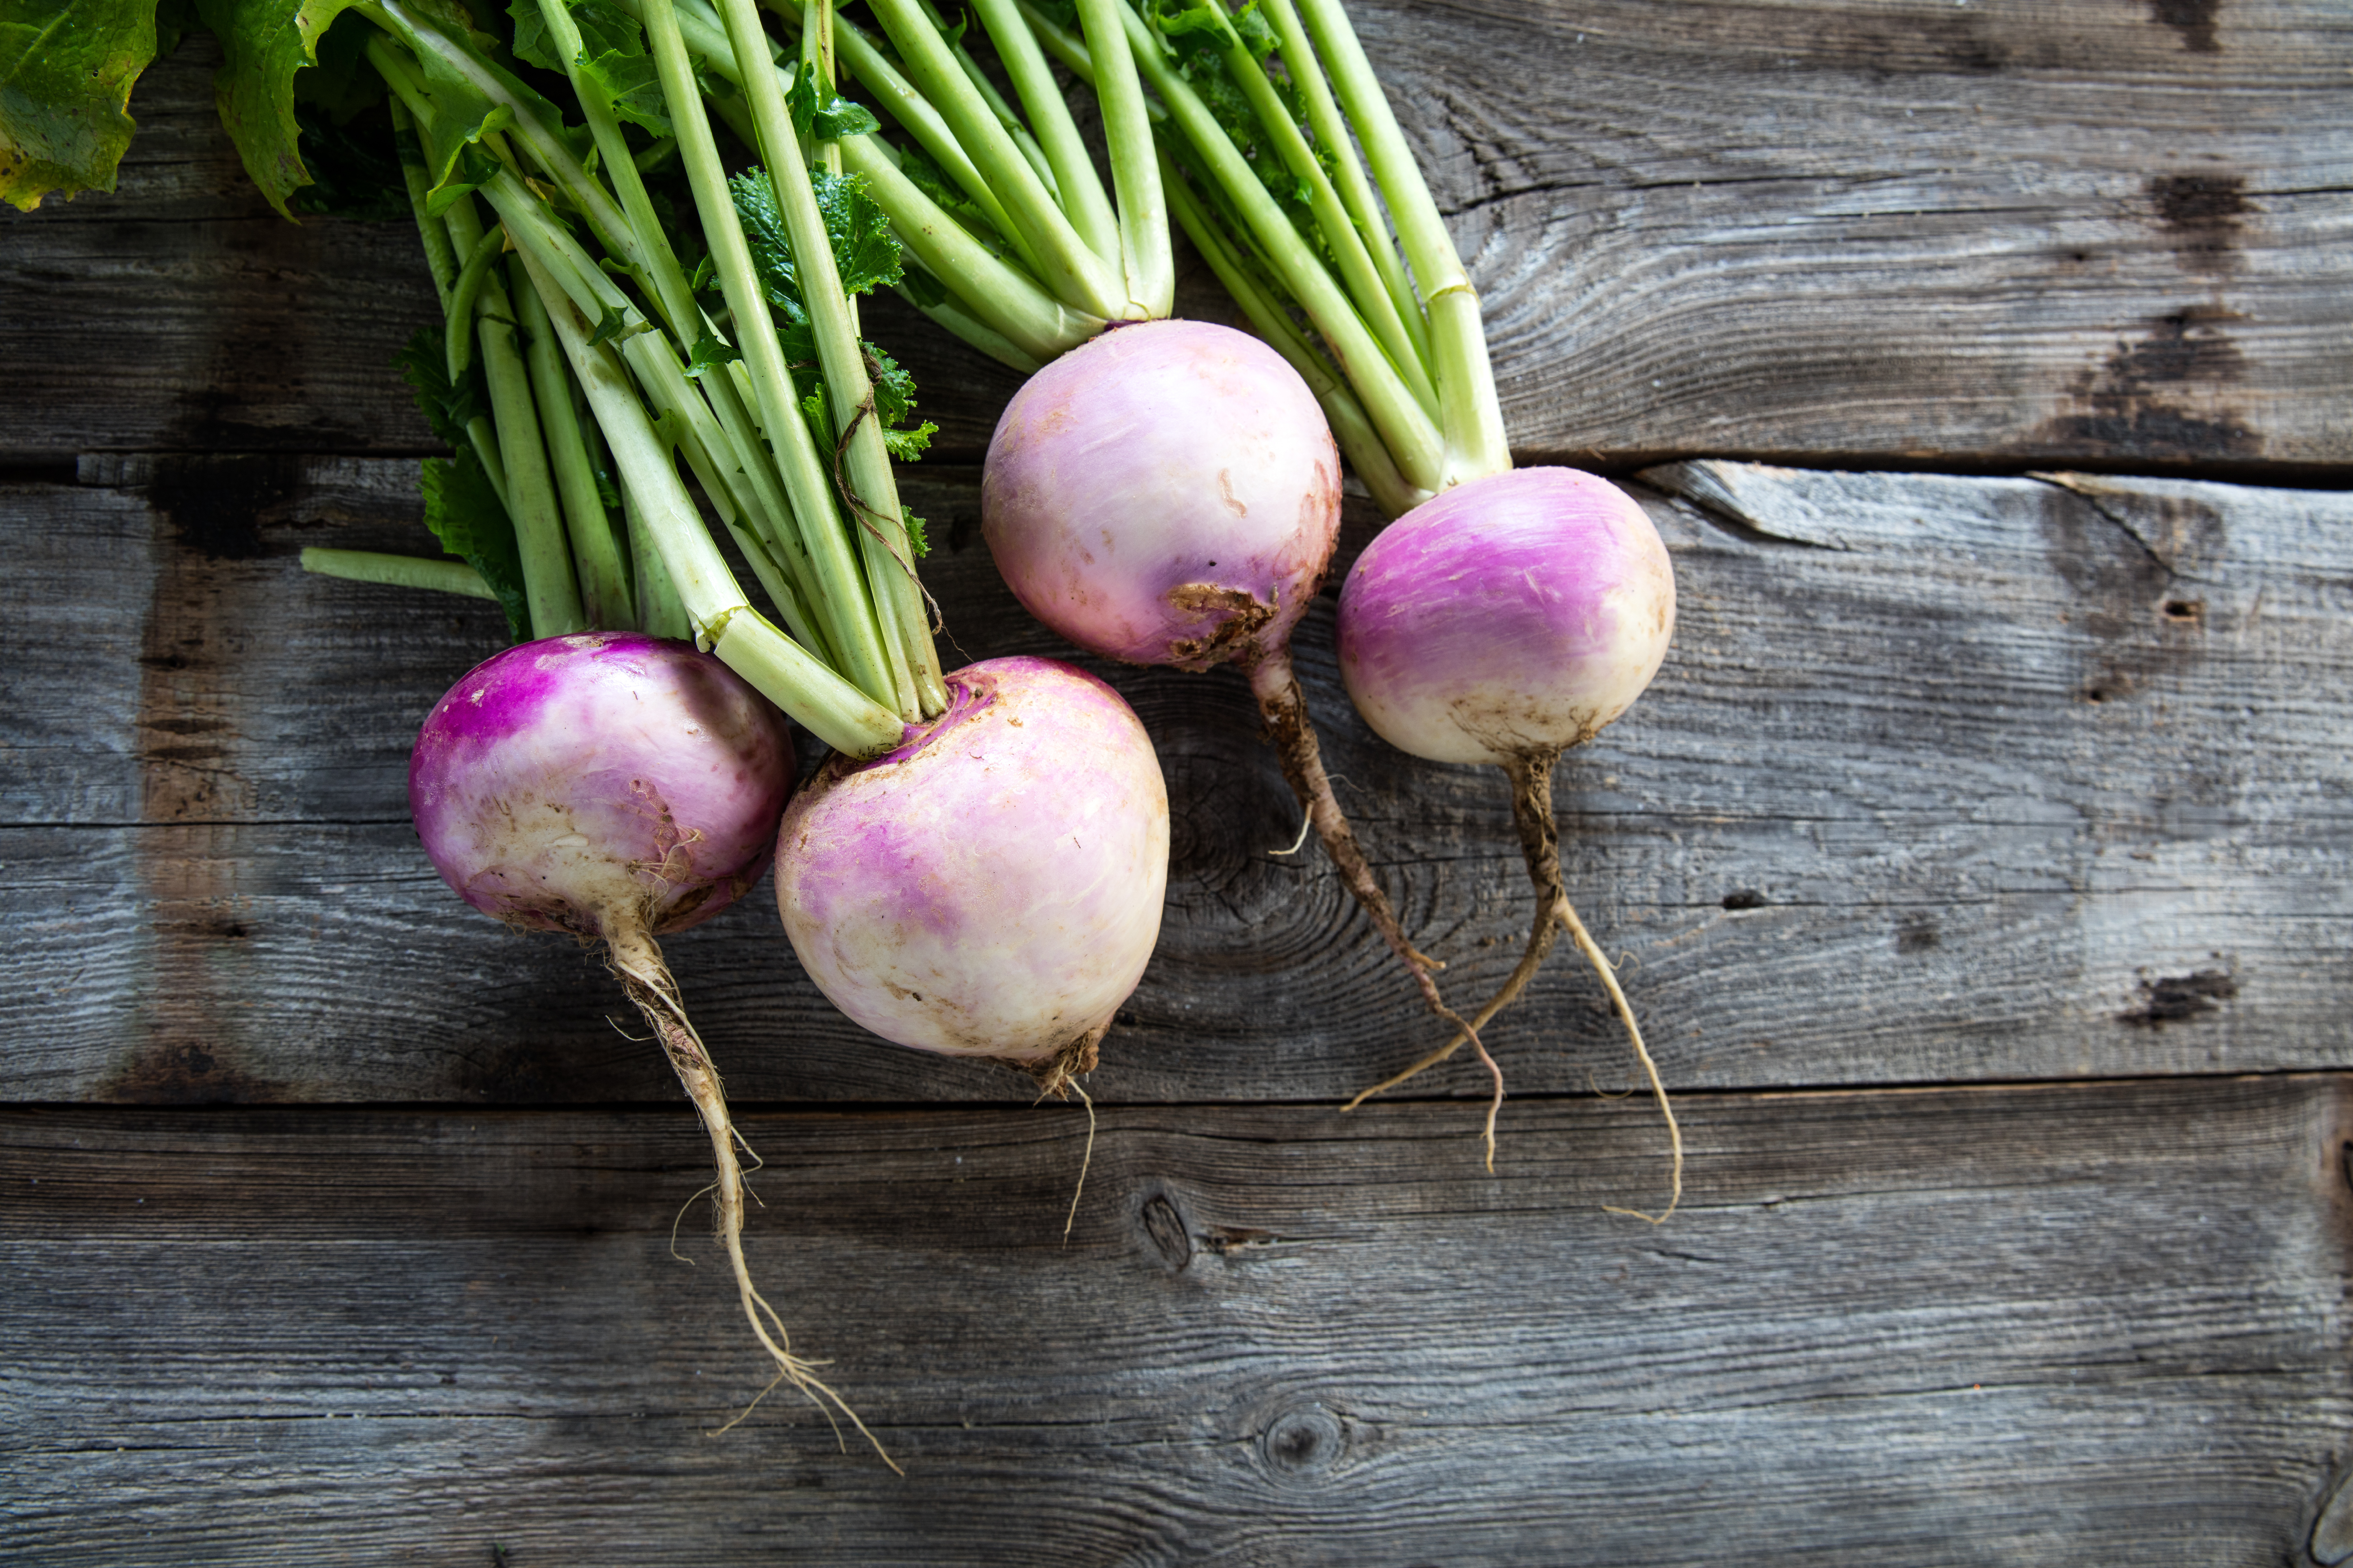 Make Time for Turnips